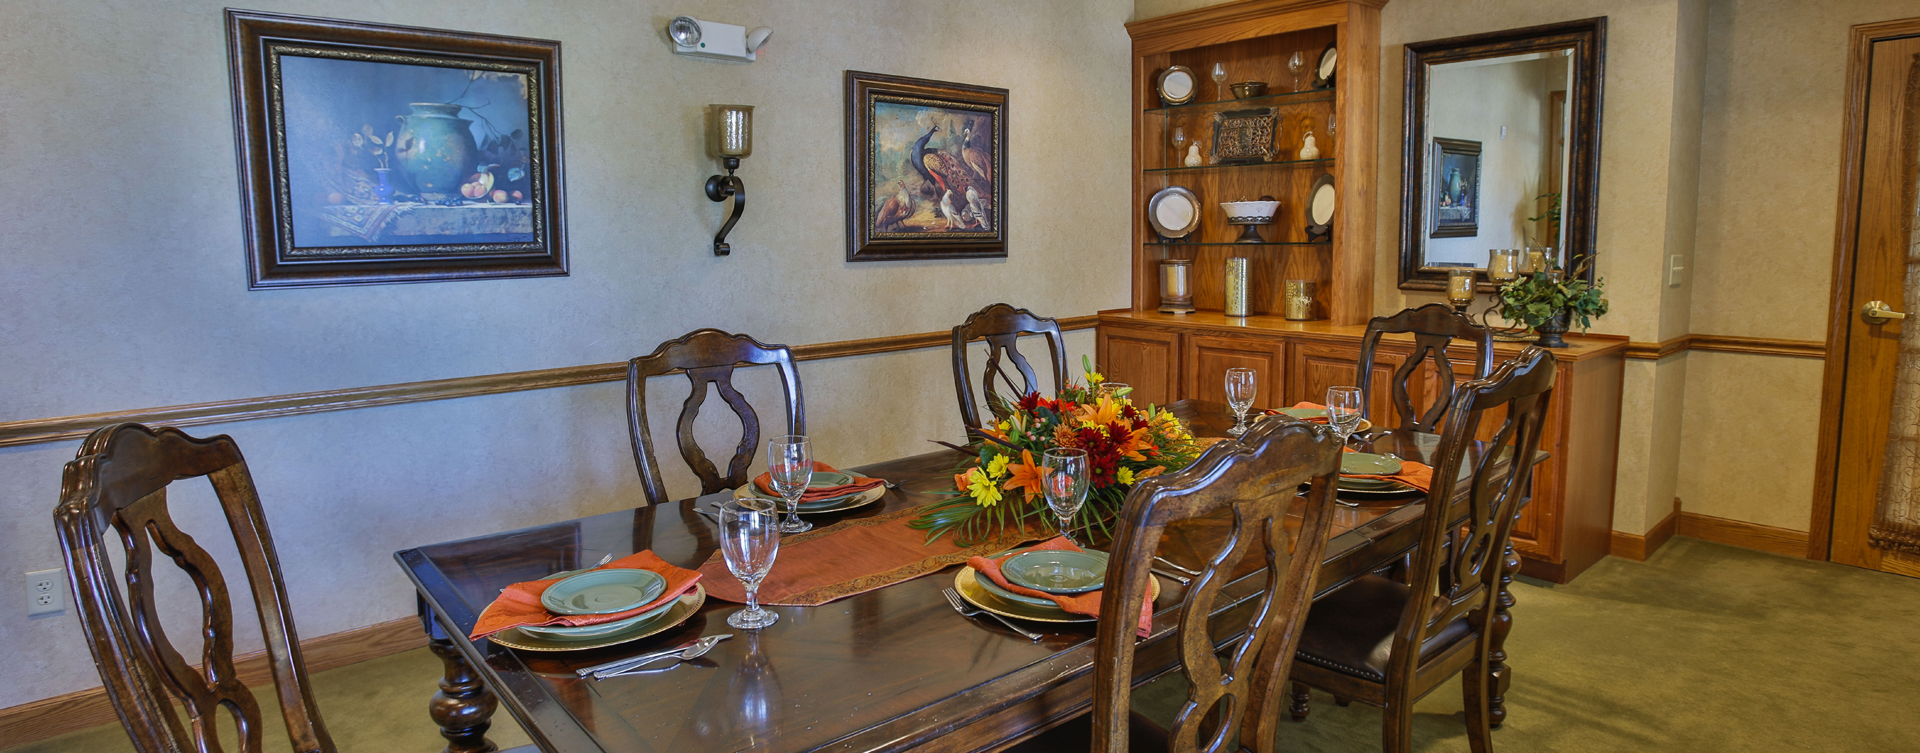 Food is best when shared with family and friends in the private dining room at Bickford of Peoria